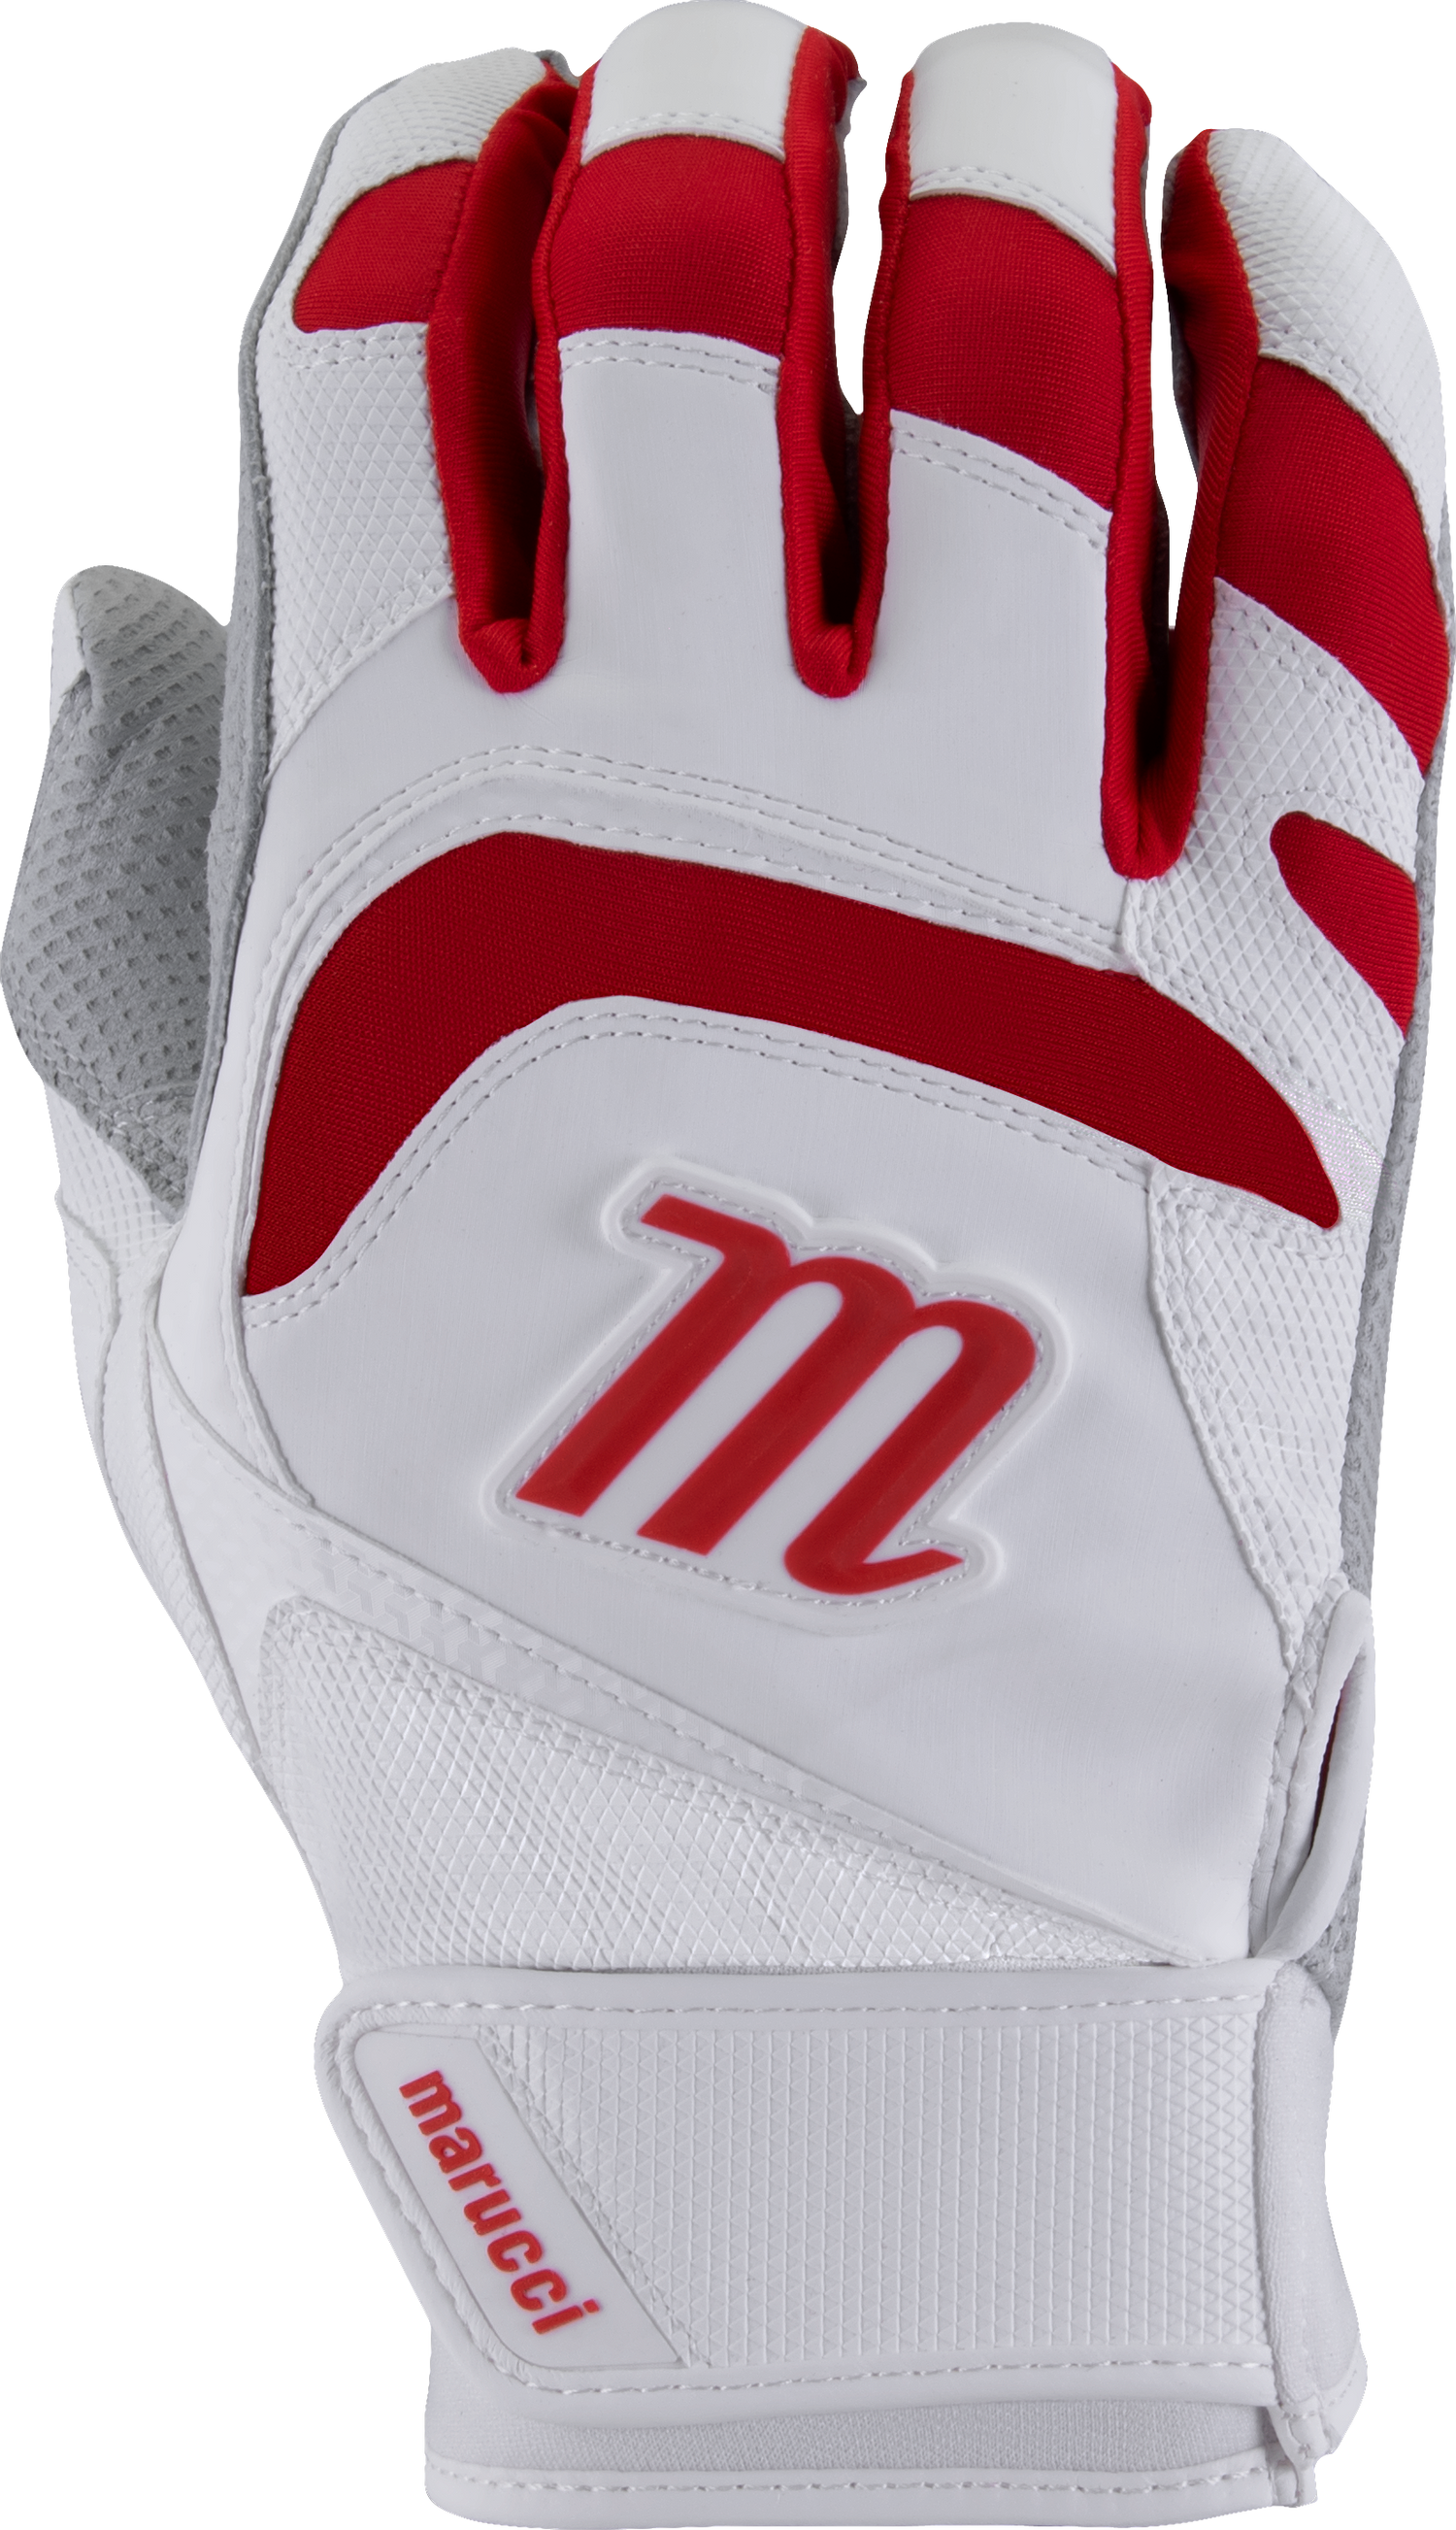 Youth Signature Batting Gloves V4 - Red